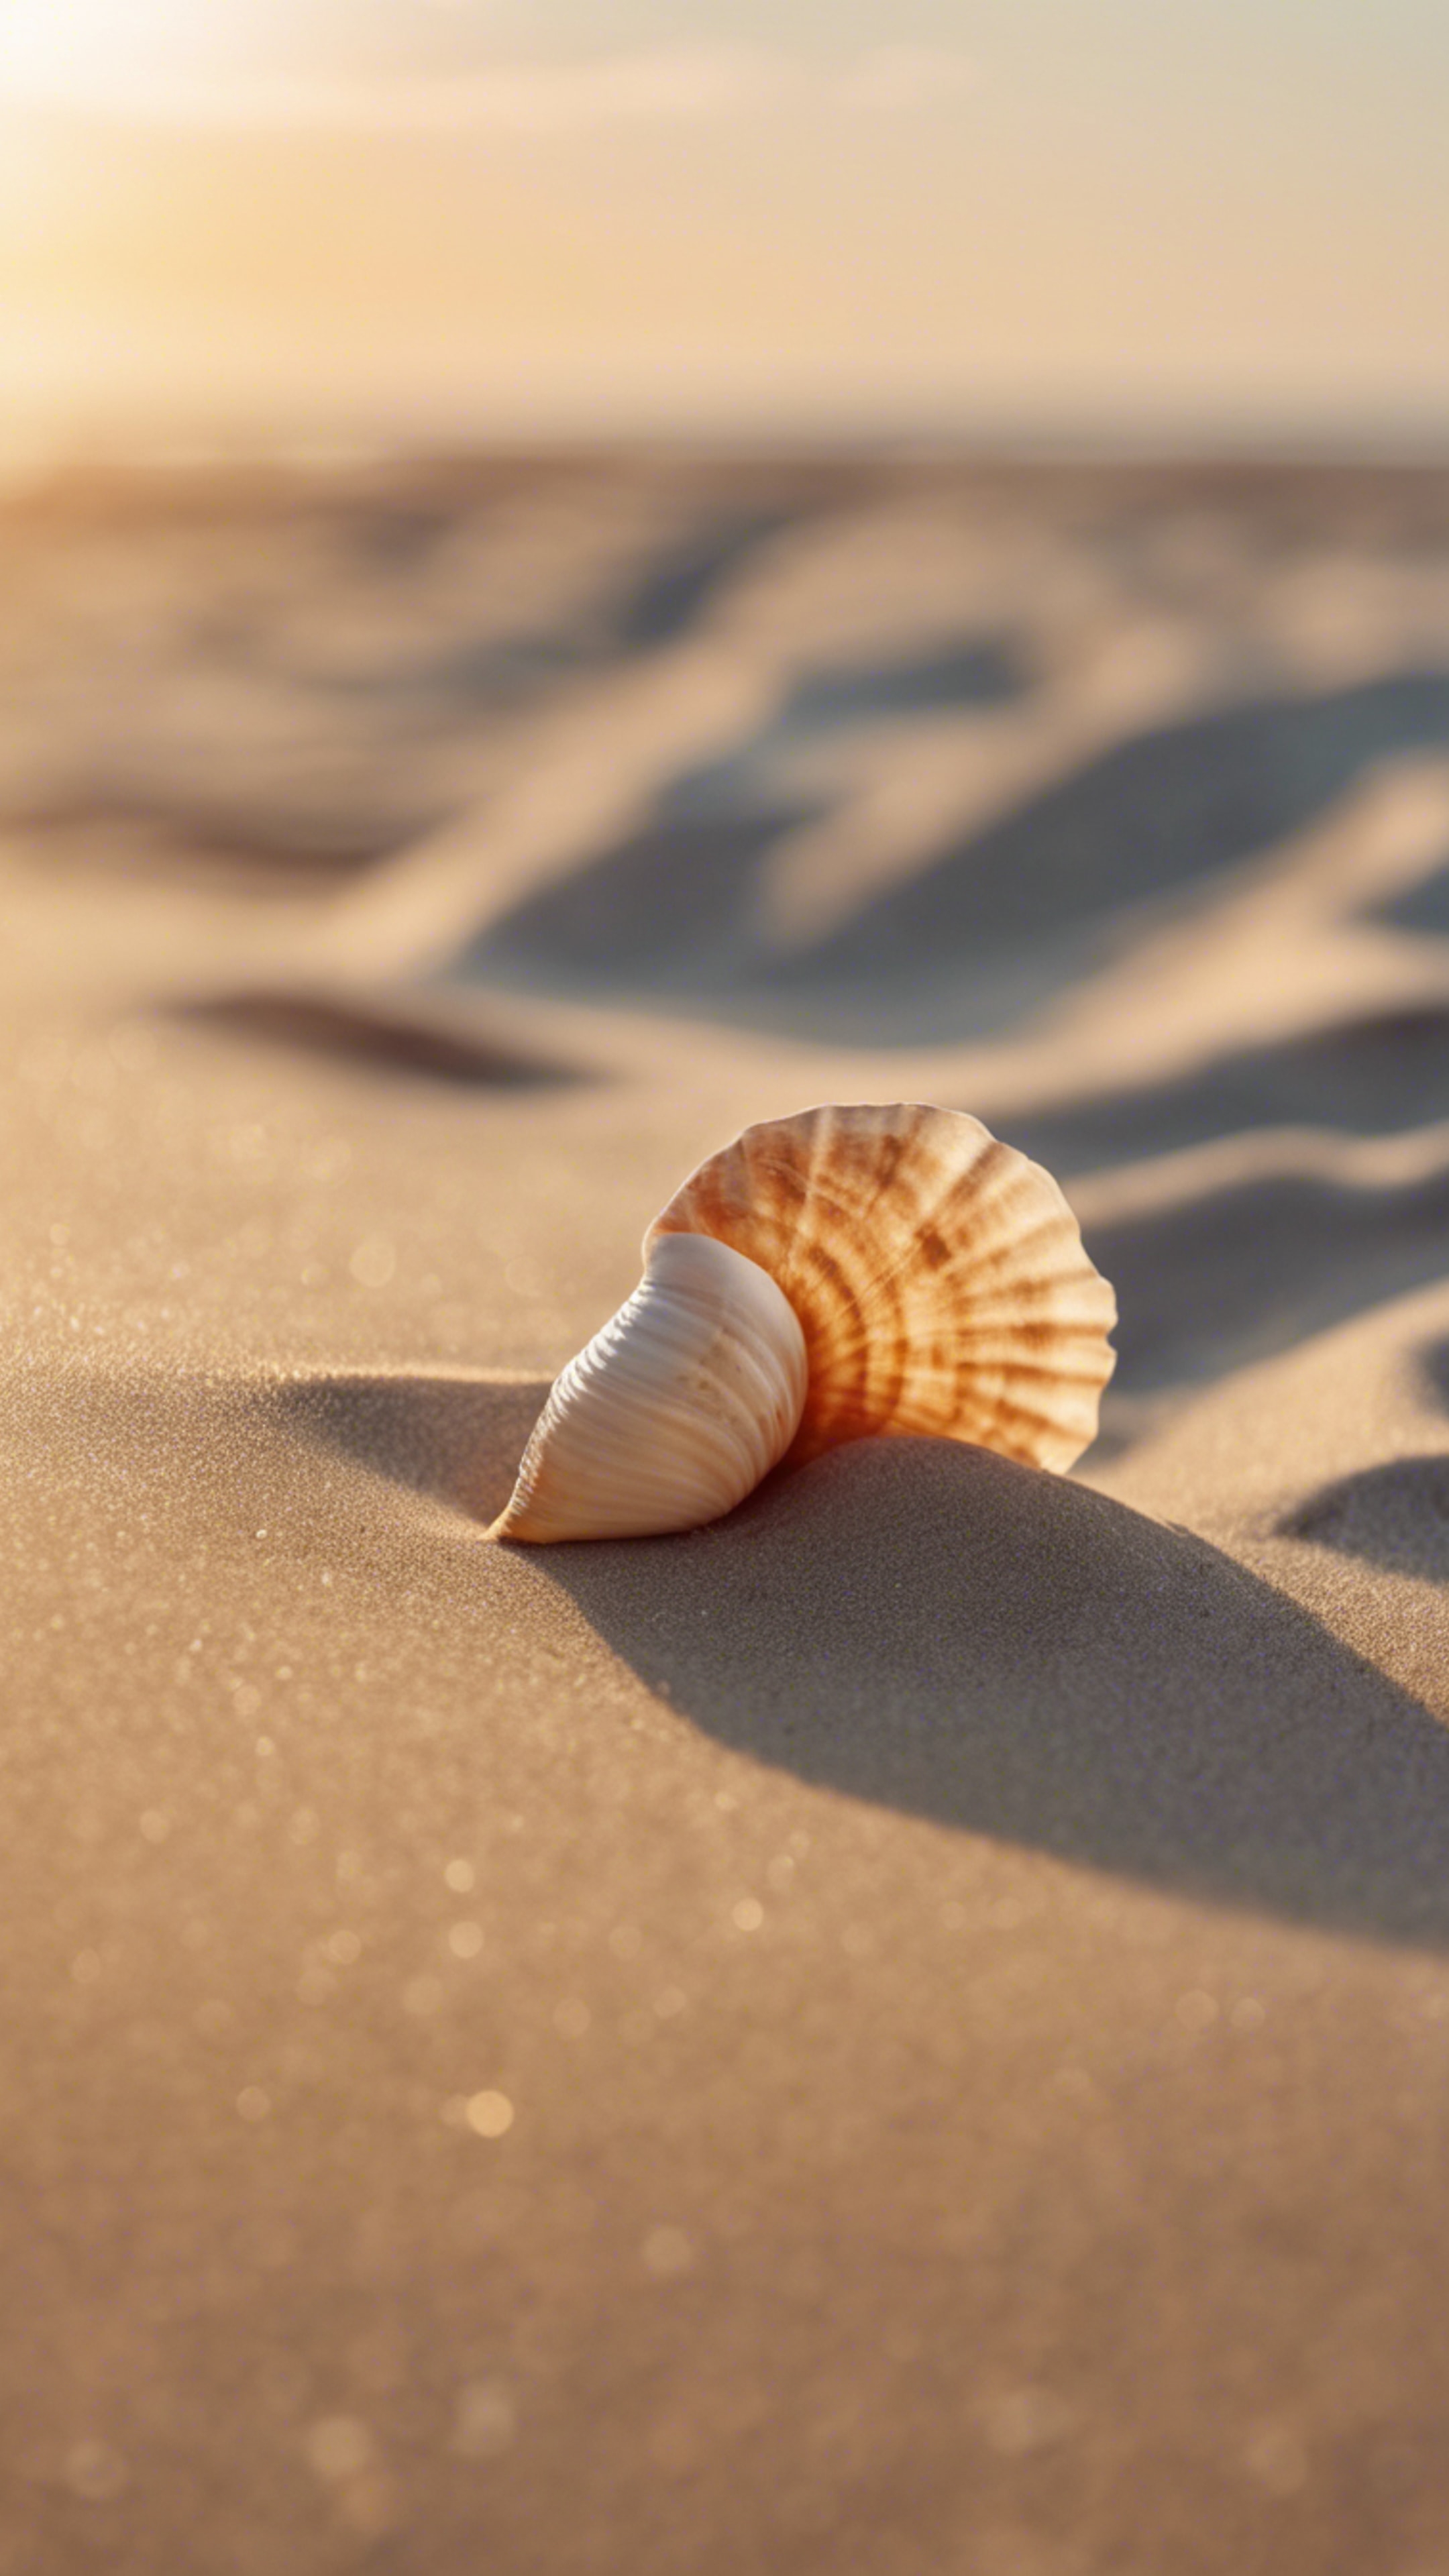 A sandy beach at sunrise, with a lonely seashell on the smooth, cool beige sand. Tapeet[f397365f3b8642f18a02]